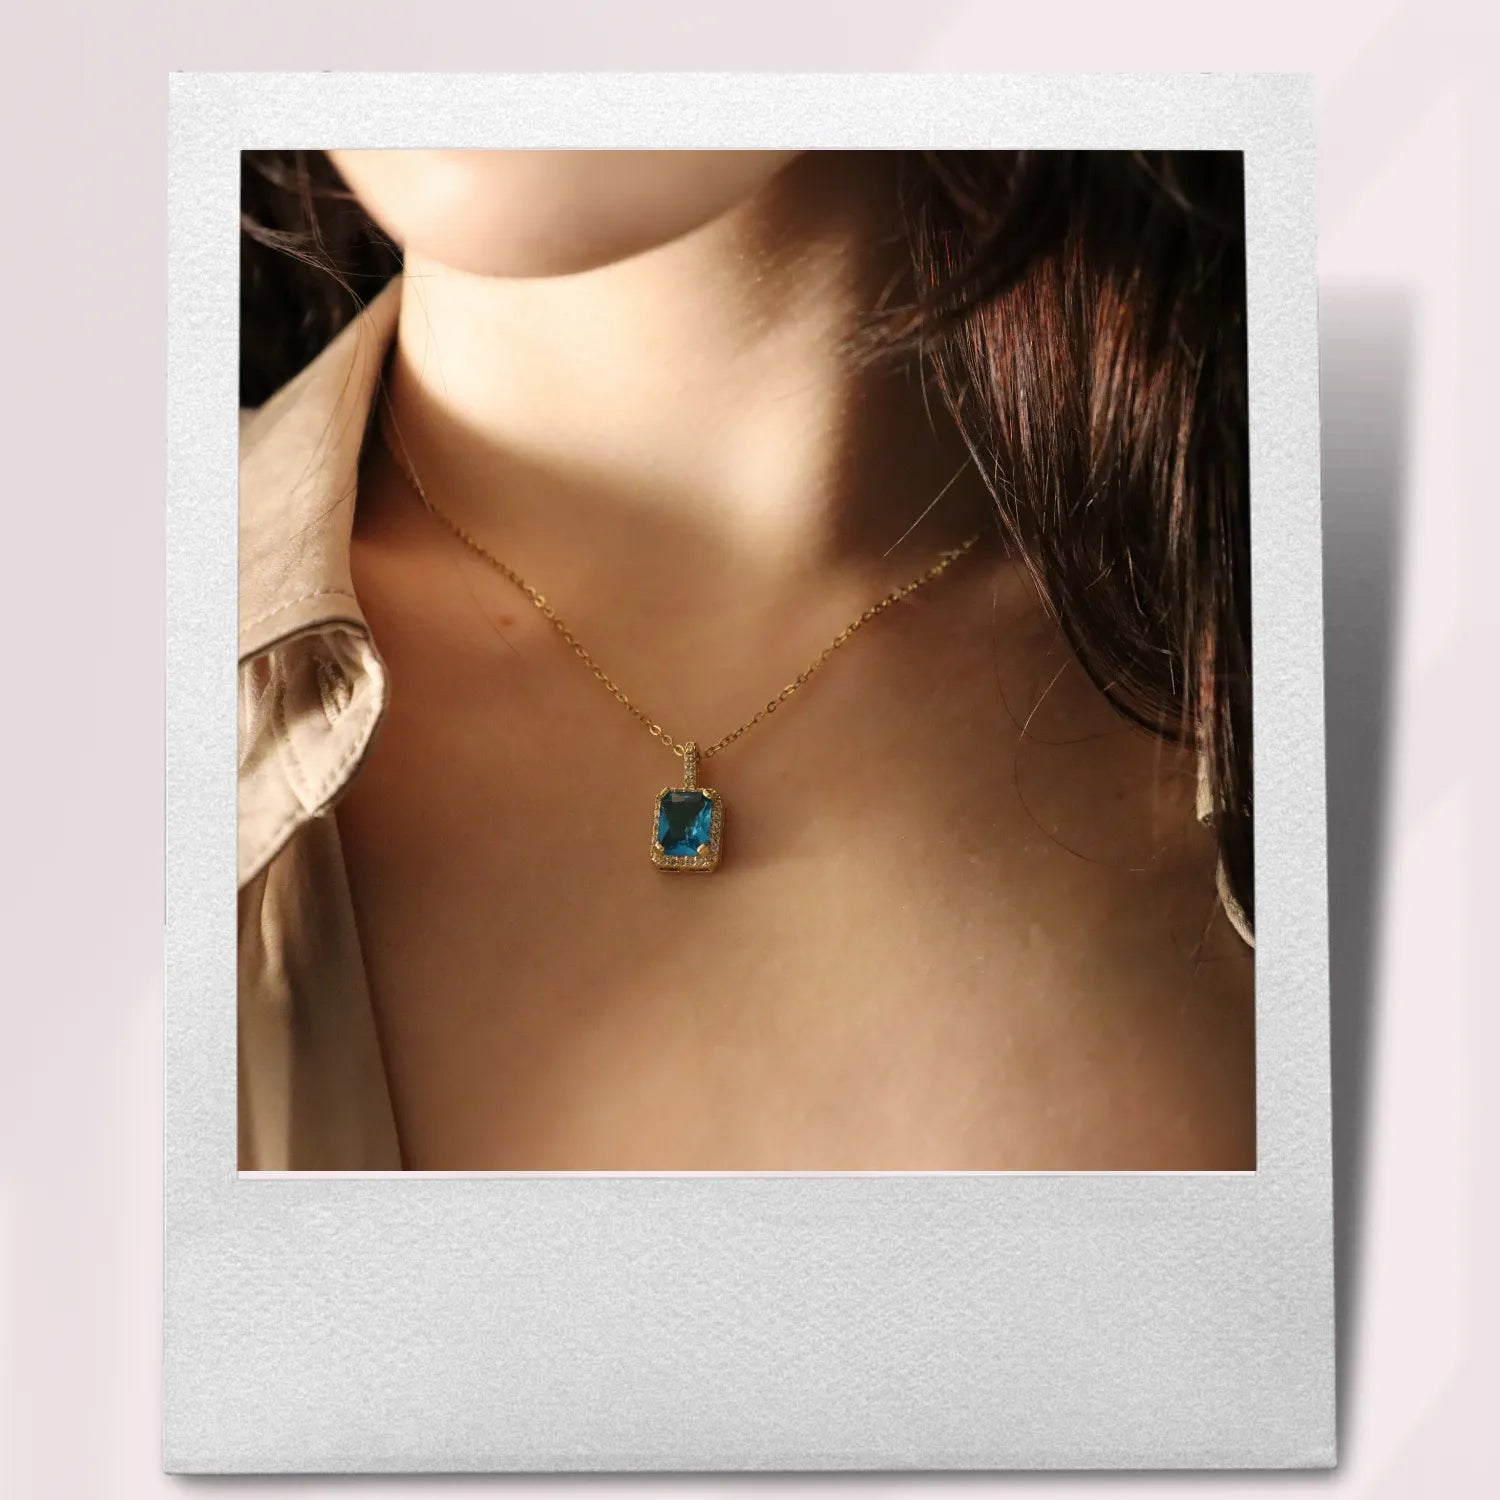 Woman wearing a blue sapphire necklace.